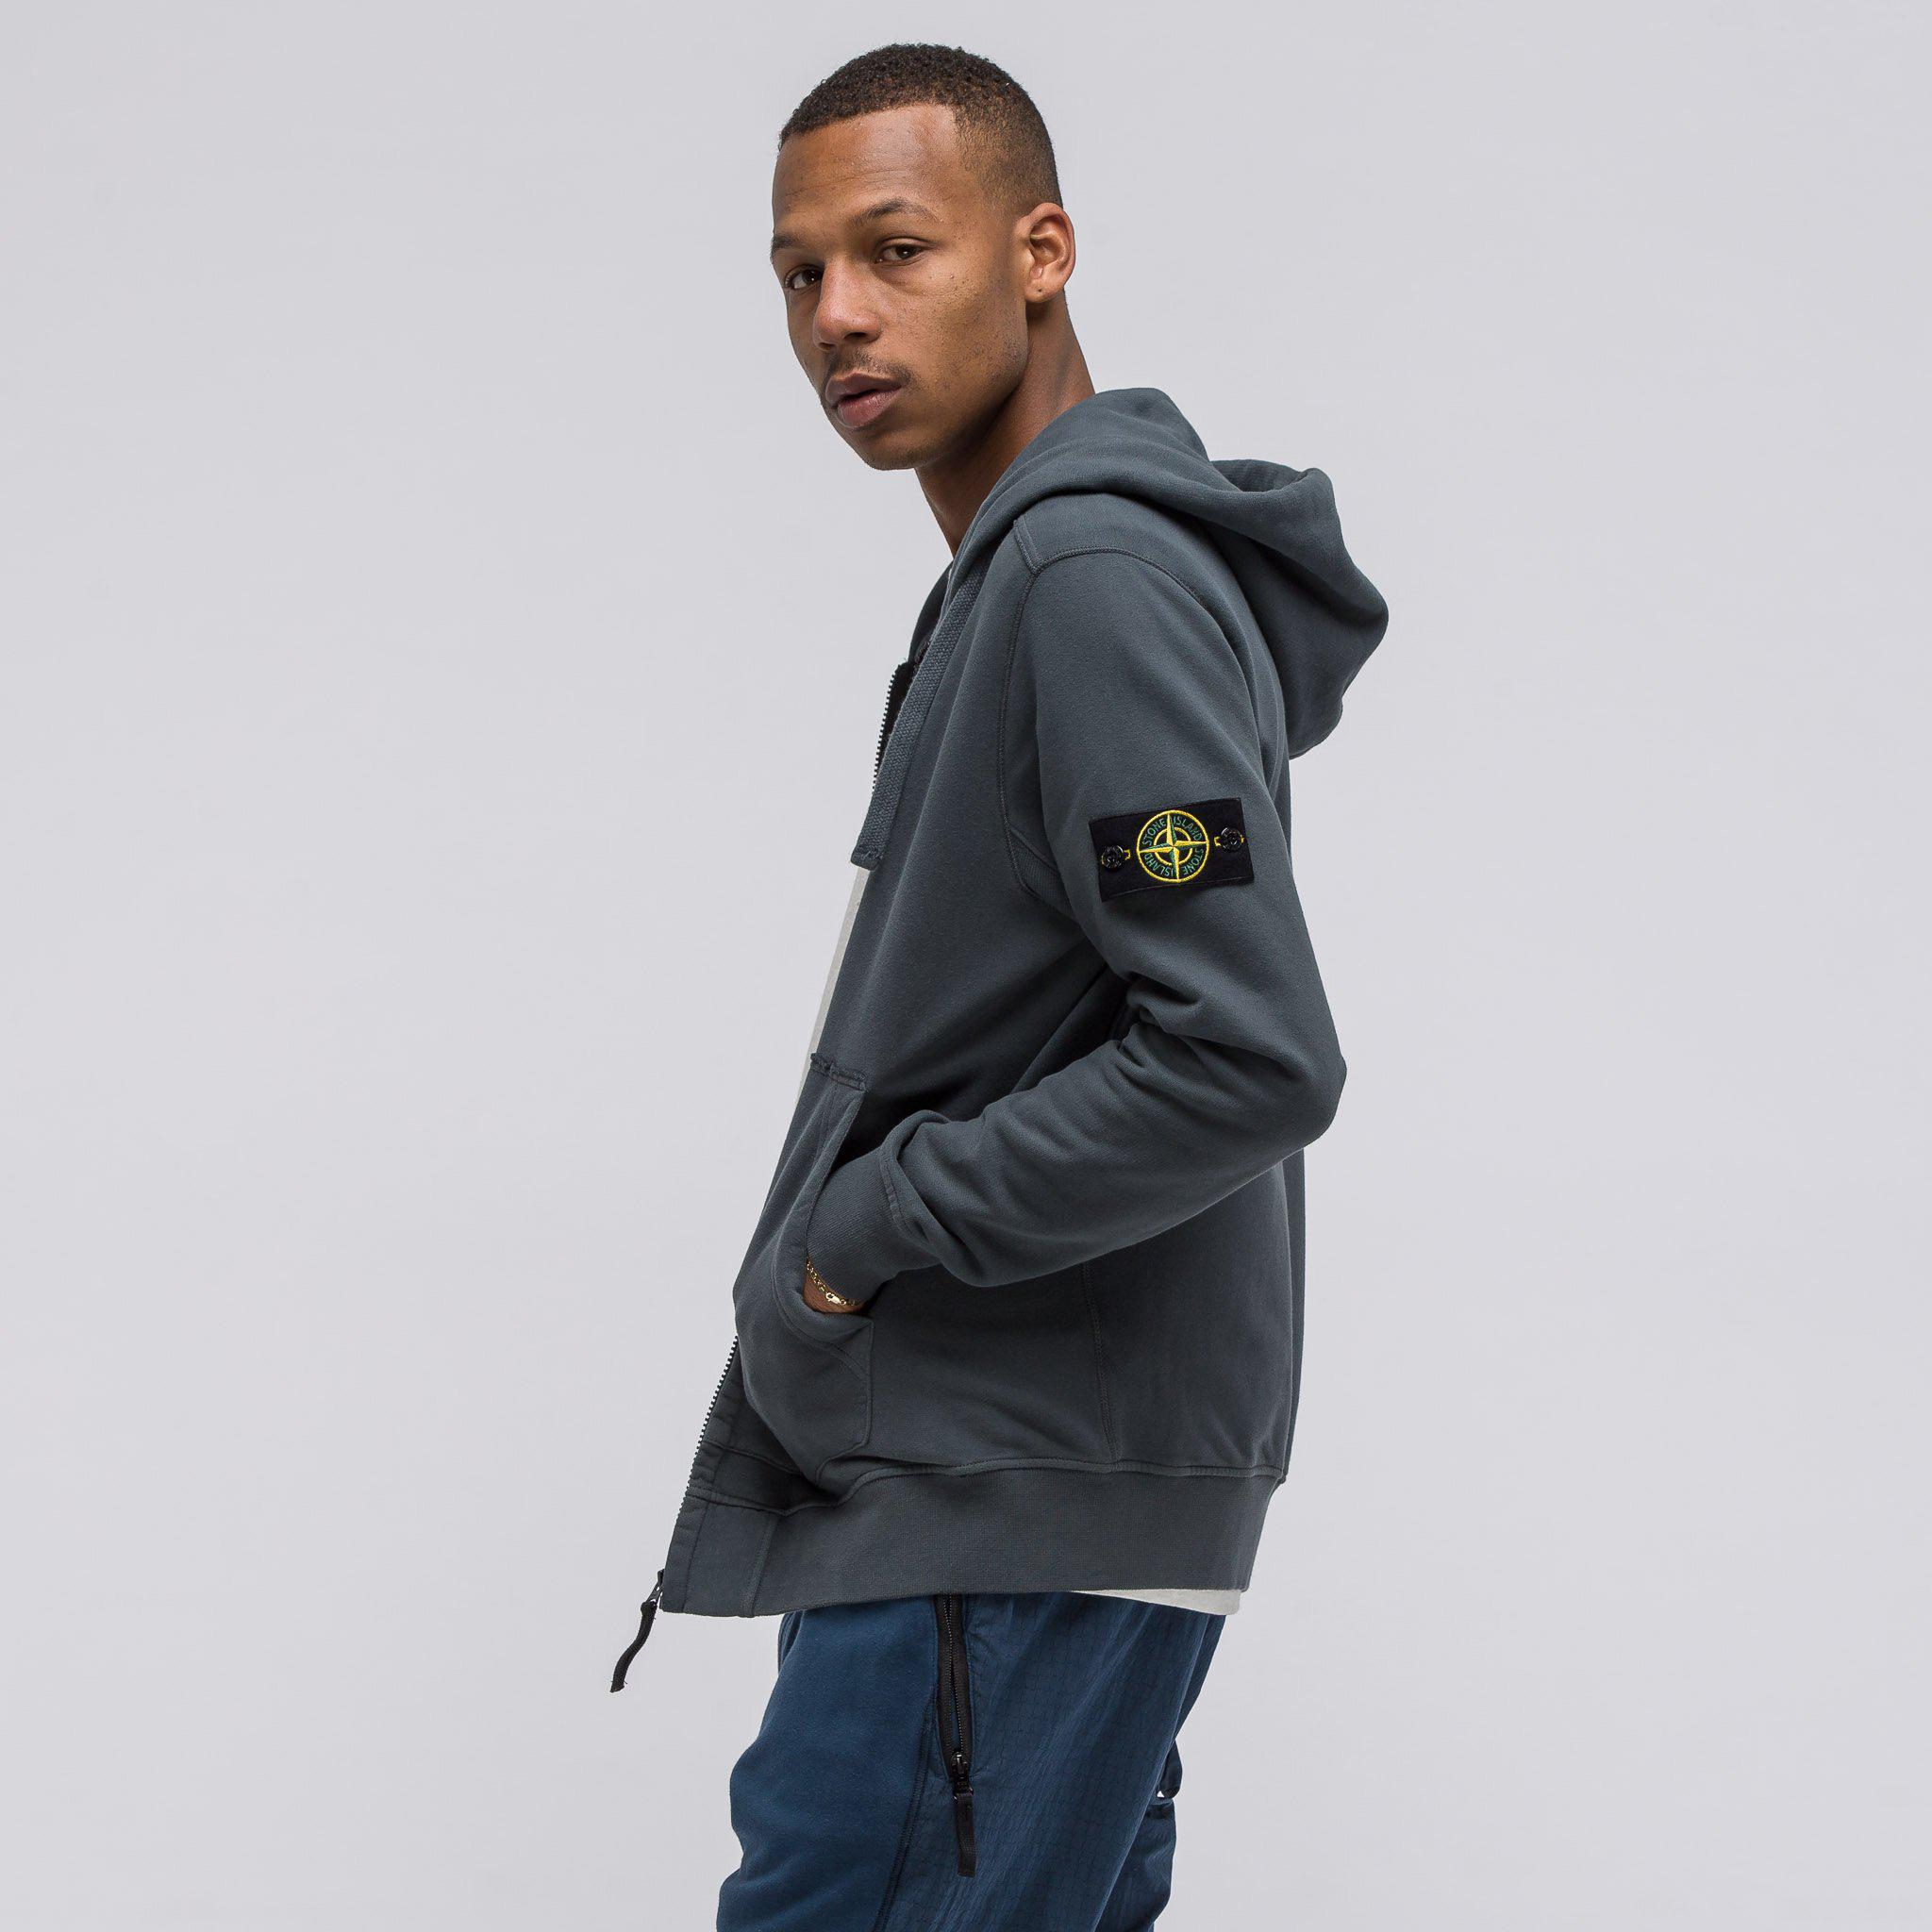 Stone Island Cotton 60220 Full Zip Hoodie In Charcoal in Gray for Men - Lyst